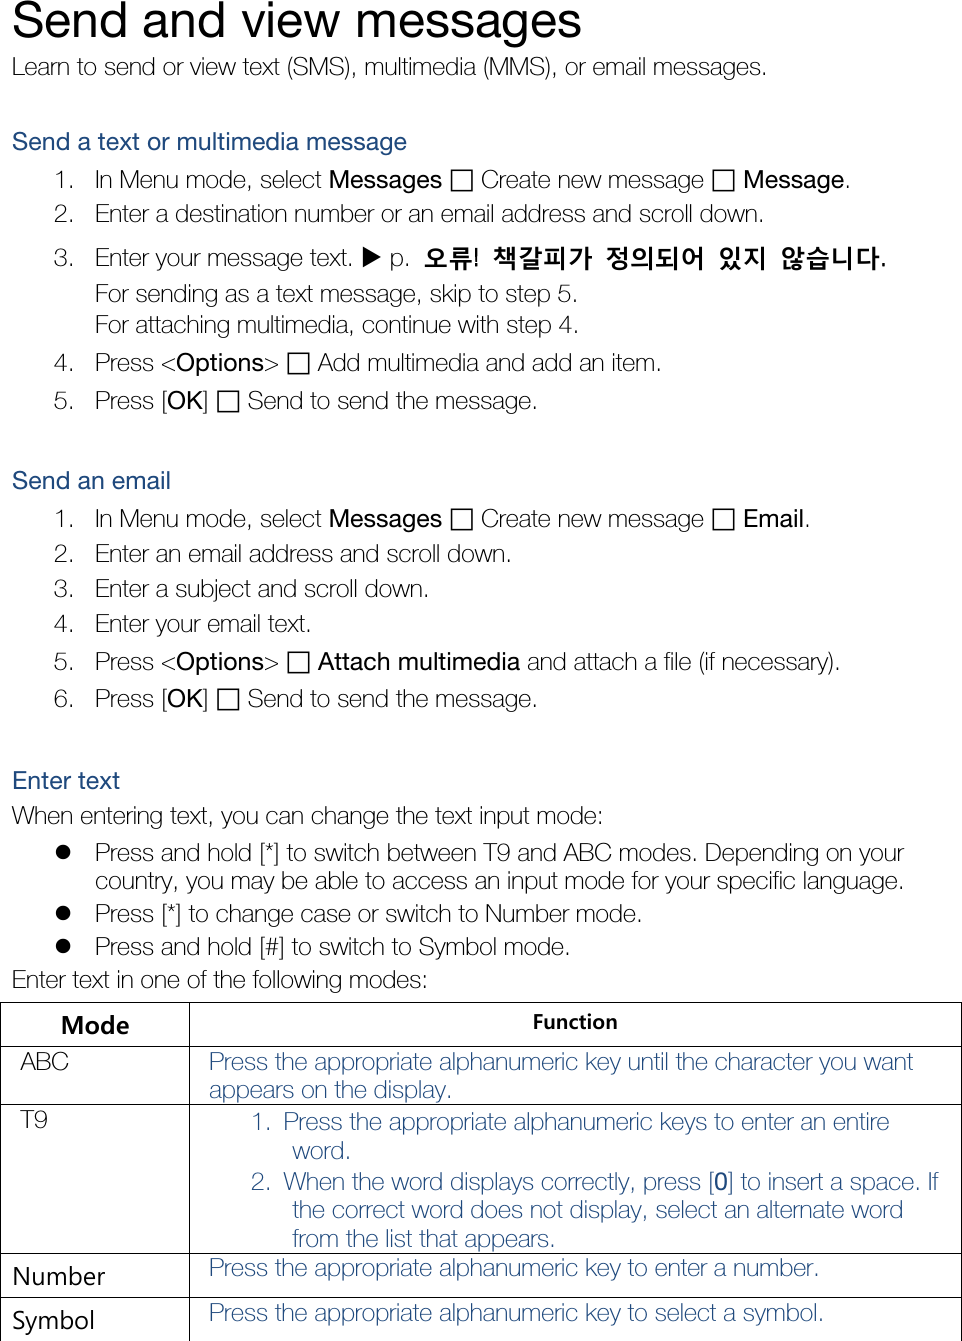  Send and view messages Learn to send or view text (SMS), multimedia (MMS), or email messages.  Send a text or multimedia message 1. In Menu mode, select Messages  Create new message  Message. 2. Enter a destination number or an email address and scroll down. 3. Enter your message text.  p.  오류!  책갈피가 정의되어 있지 않습니다. For sending as a text message, skip to step 5. For attaching multimedia, continue with step 4. 4. Press &lt;Options&gt;  Add multimedia and add an item. 5. Press [OK]  Send to send the message.  Send an email 1. In Menu mode, select Messages  Create new message  Email. 2. Enter an email address and scroll down. 3. Enter a subject and scroll down. 4. Enter your email text. 5. Press &lt;Options&gt;  Attach multimedia and attach a file (if necessary). 6. Press [OK]  Send to send the message.  Enter text When entering text, you can change the text input mode:  Press and hold [*] to switch between T9 and ABC modes. Depending on your country, you may be able to access an input mode for your specific language.  Press [*] to change case or switch to Number mode.  Press and hold [#] to switch to Symbol mode. Enter text in one of the following modes: Mode Function ABC Press the appropriate alphanumeric key until the character you want appears on the display. T9 1. Press the appropriate alphanumeric keys to enter an entire word. 2. When the word displays correctly, press [0] to insert a space. If the correct word does not display, select an alternate word from the list that appears. Number Press the appropriate alphanumeric key to enter a number. Symbol Press the appropriate alphanumeric key to select a symbol. 